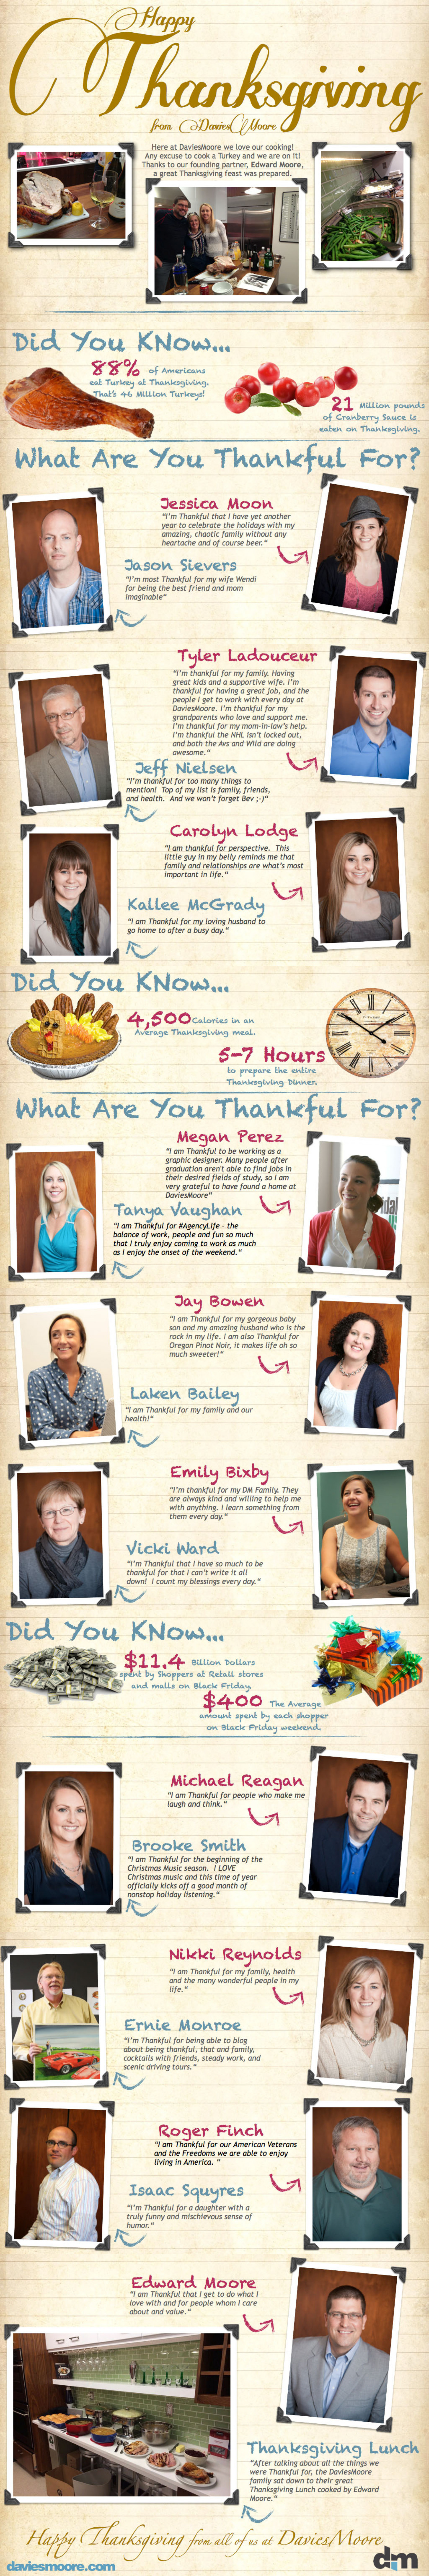 Thanksgiving Infographic from DaviesMoore Infographic